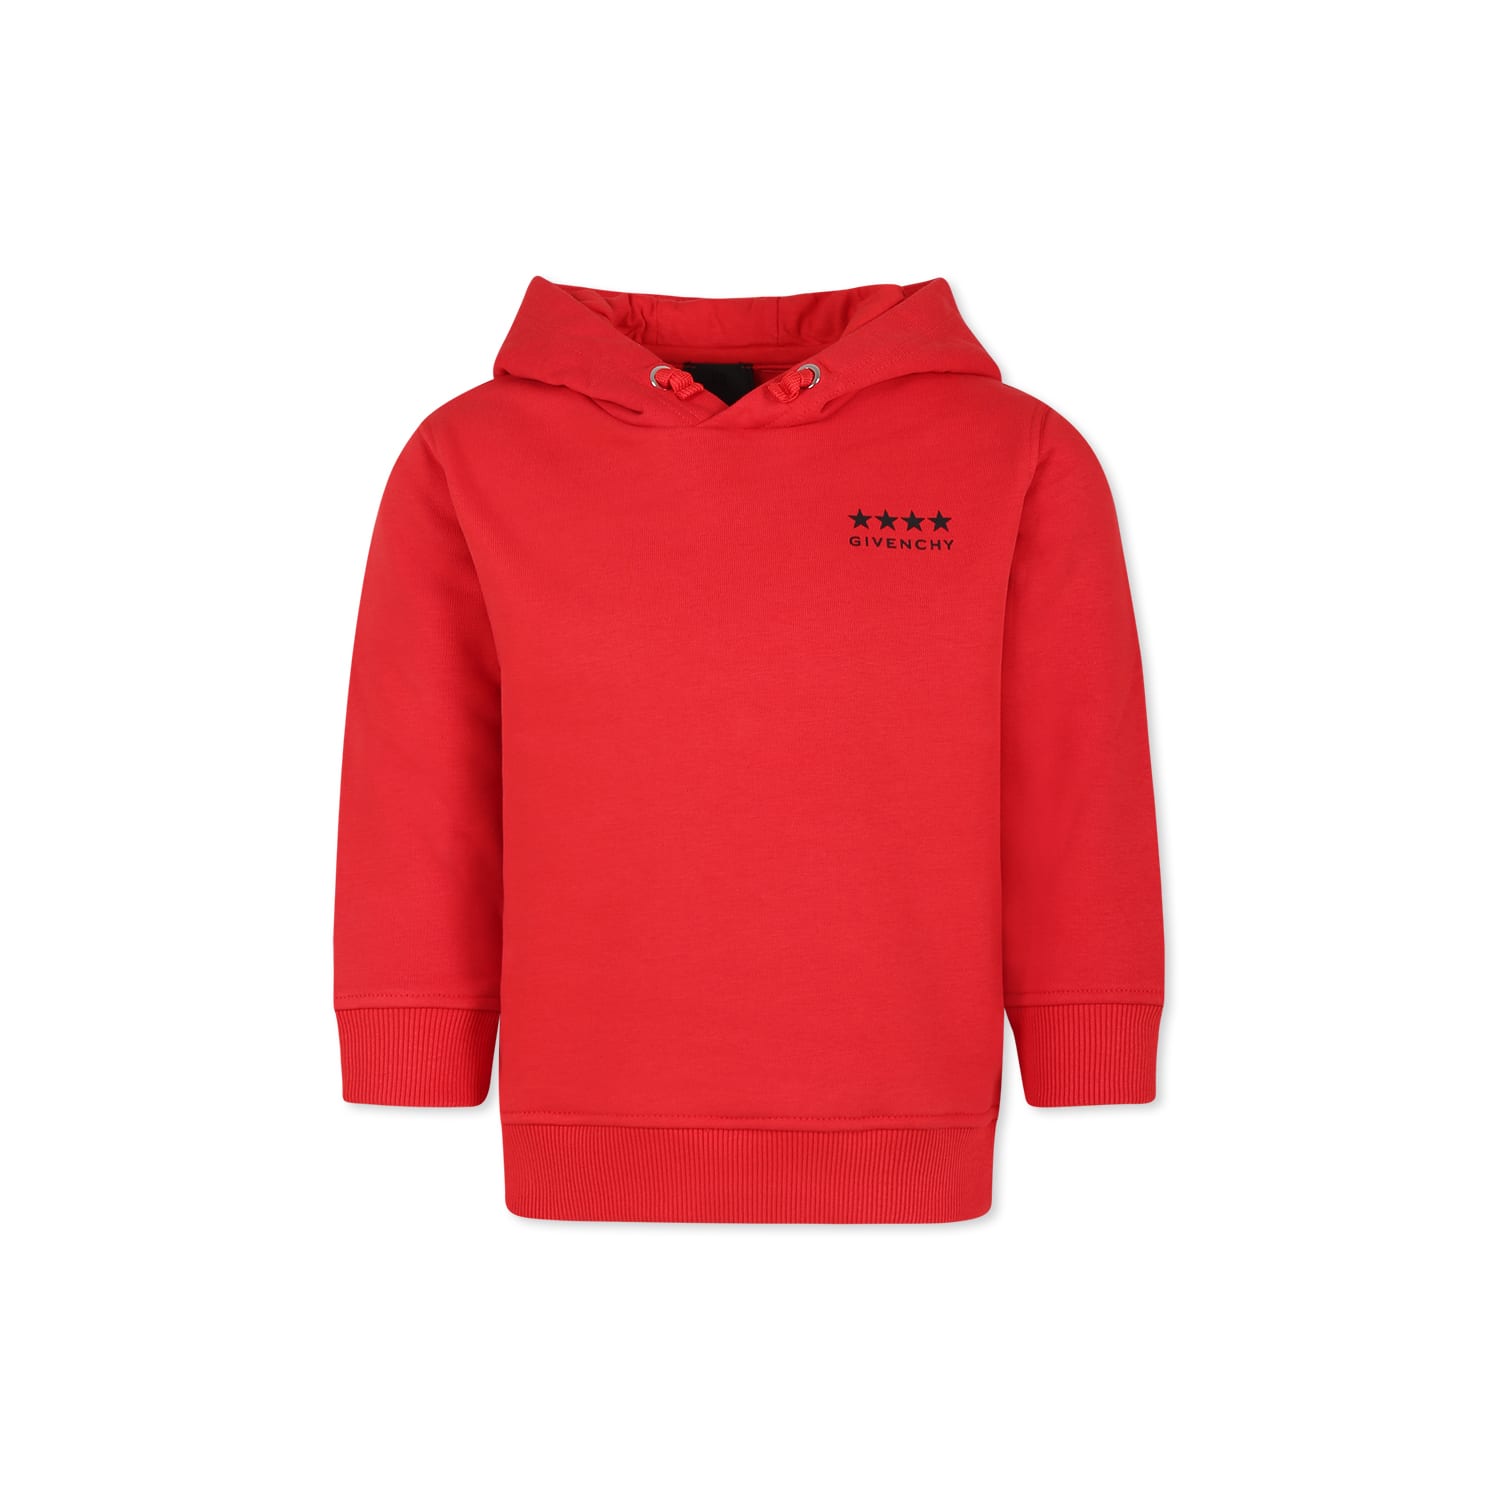 Givenchy Kids' Red Sweatshirt For Boy With Stars And Iconic 4g Motif